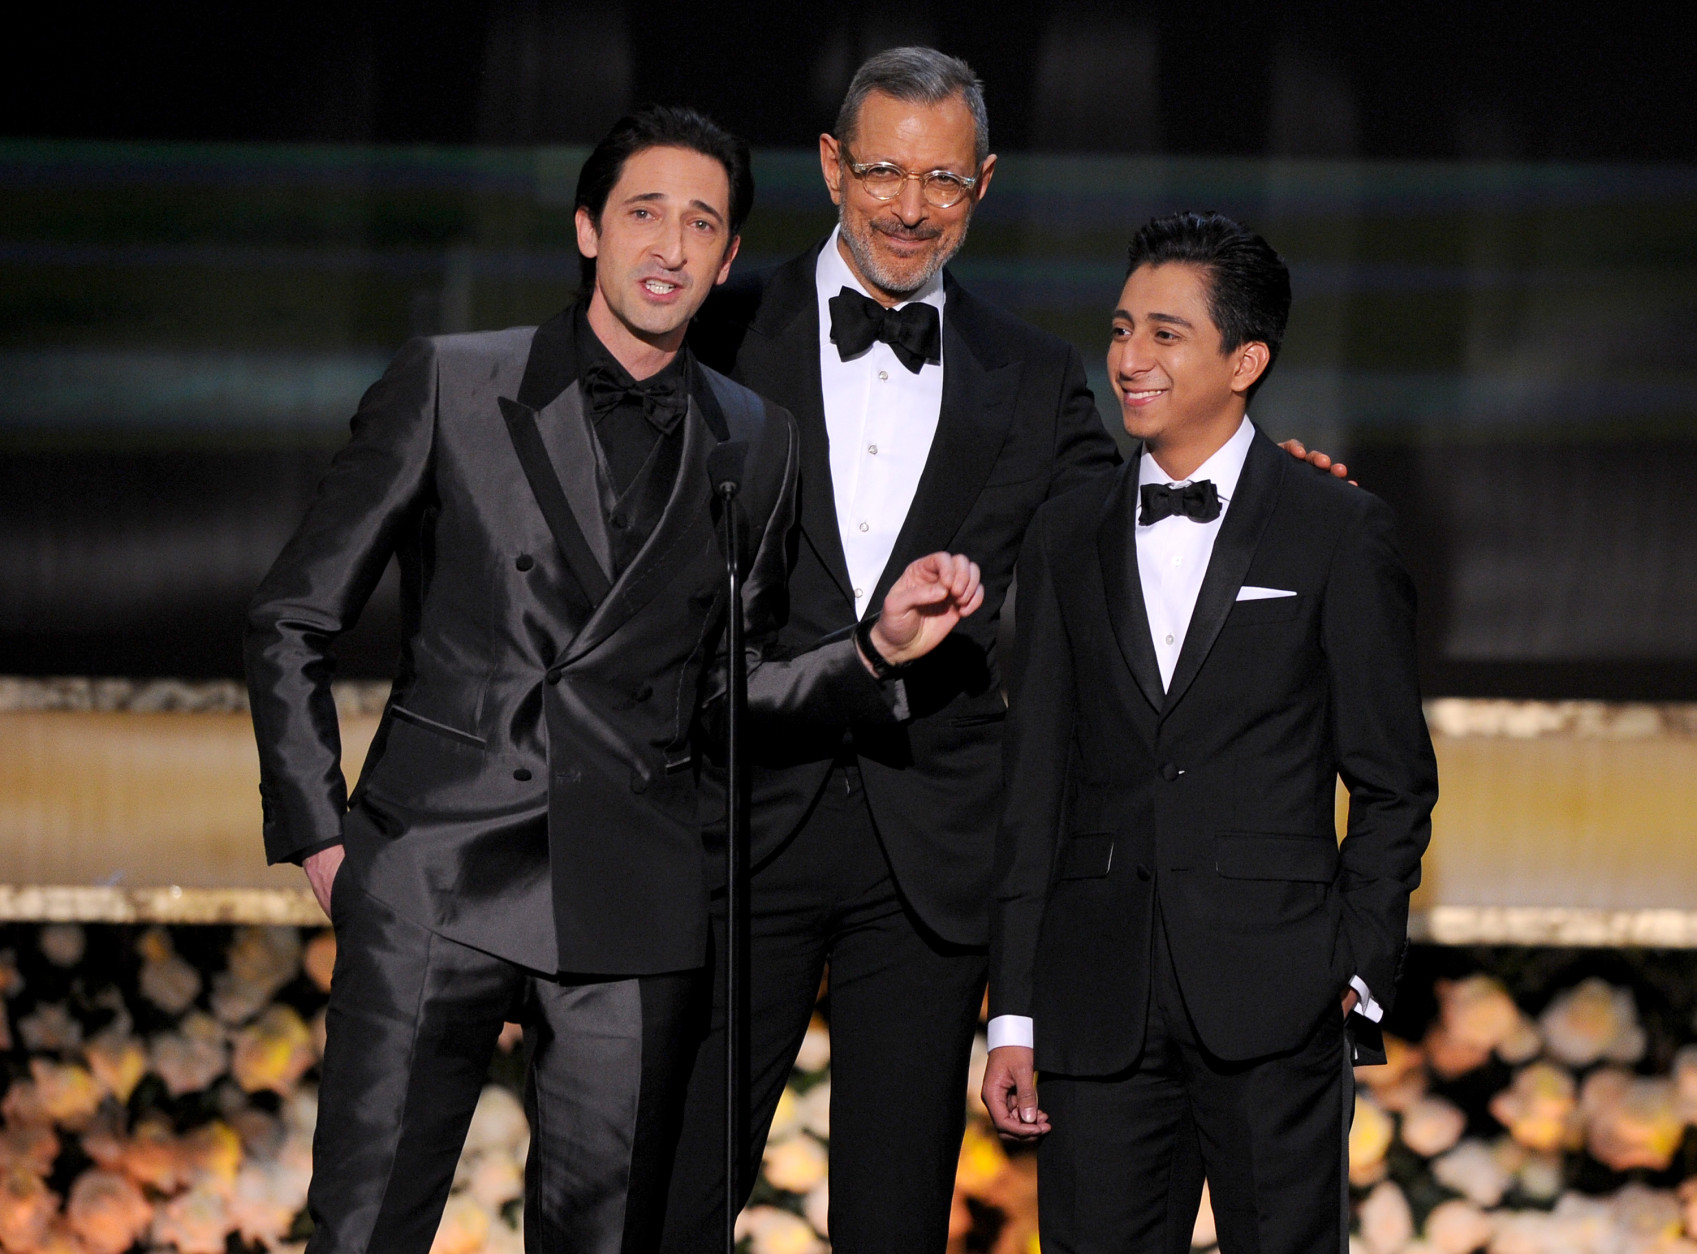 Adrien Brody, from left, Jeff Goldblum and Tony Revolori speak on stage at the 21st annual Screen Actors Guild Awards at the Shrine Auditorium on Sunday, Jan. 25, 2015, in Los Angeles. (Photo by Vince Bucci/Invision/AP)